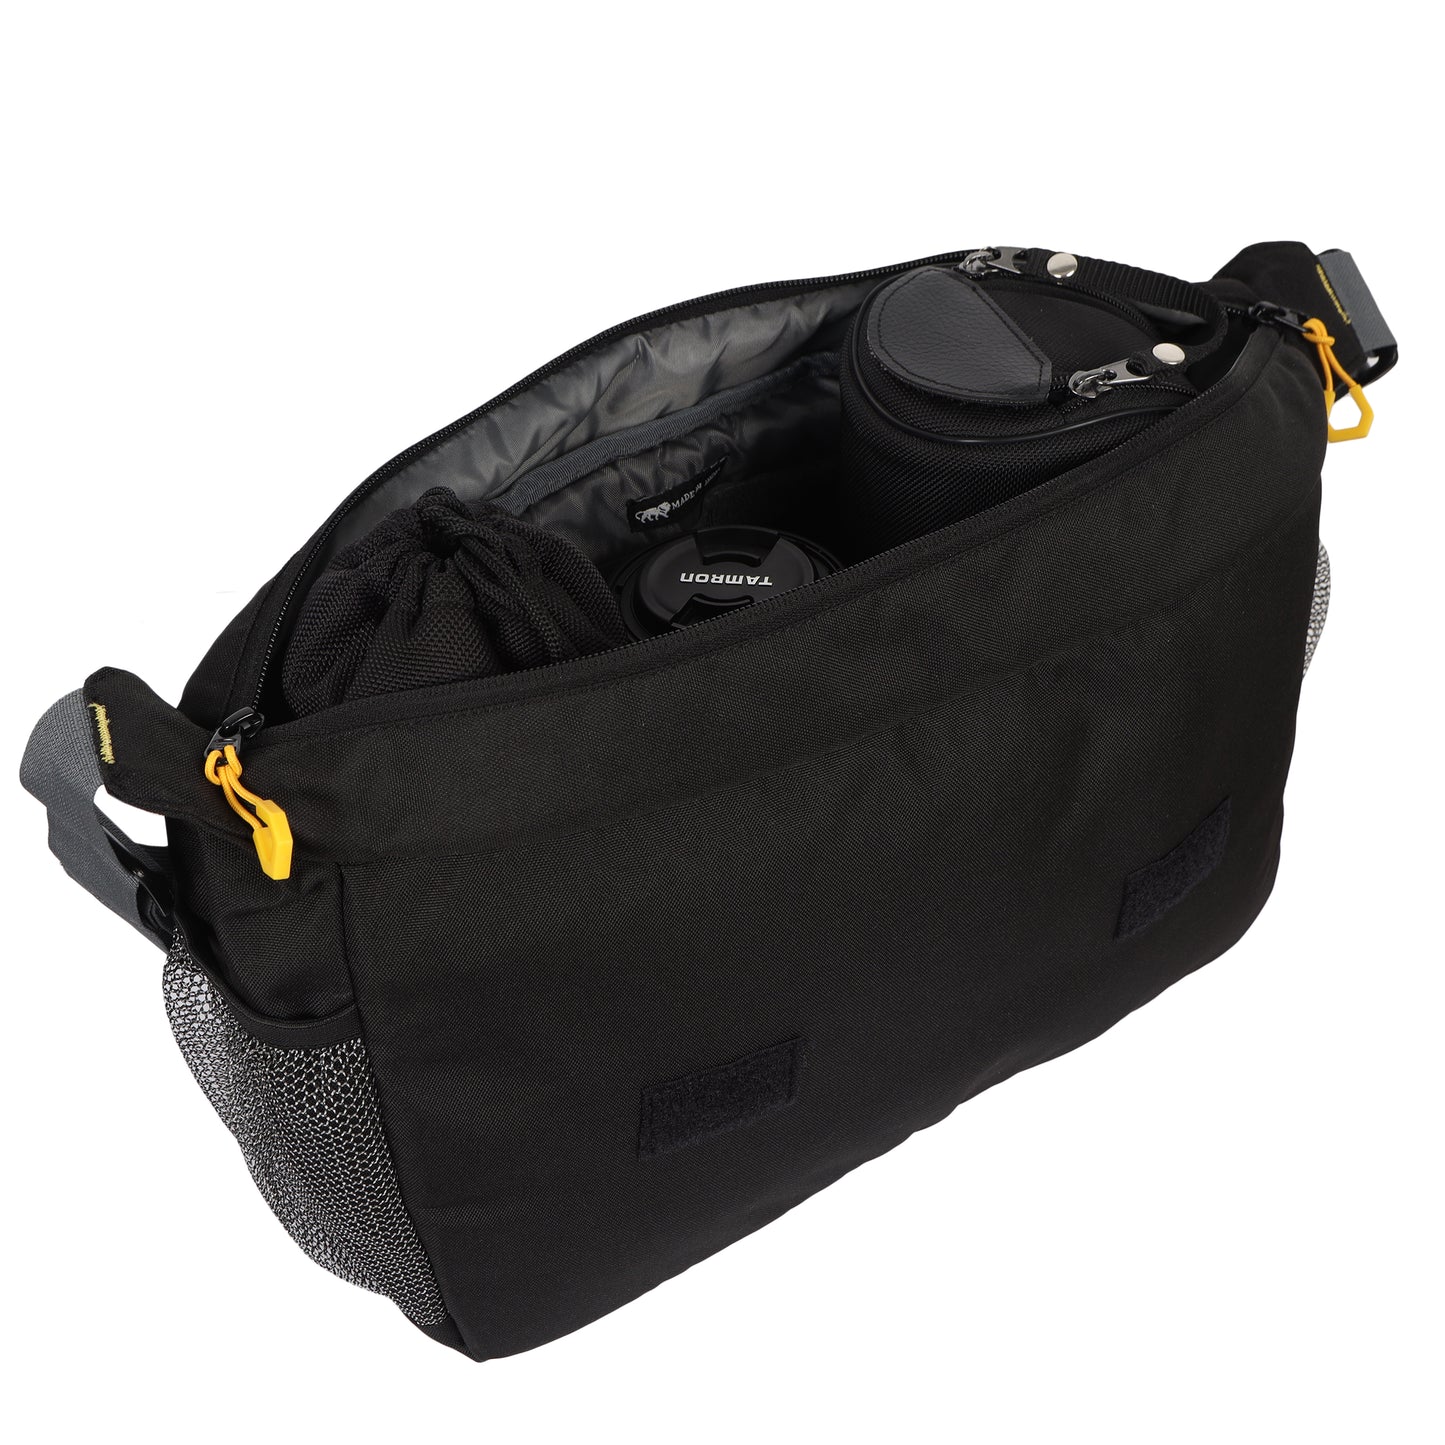 Top view of the 'Load Runner' sling bag at a 45-degree angle, with the top zipper open and lenses neatly stacked inside. The bag's design allows for secure and organized storage of up to 4 lenses. The open zipper reveals the convenient accessibility and thoughtful organization of the lenses, making it easy for photographers to quickly switch between different focal lengths.